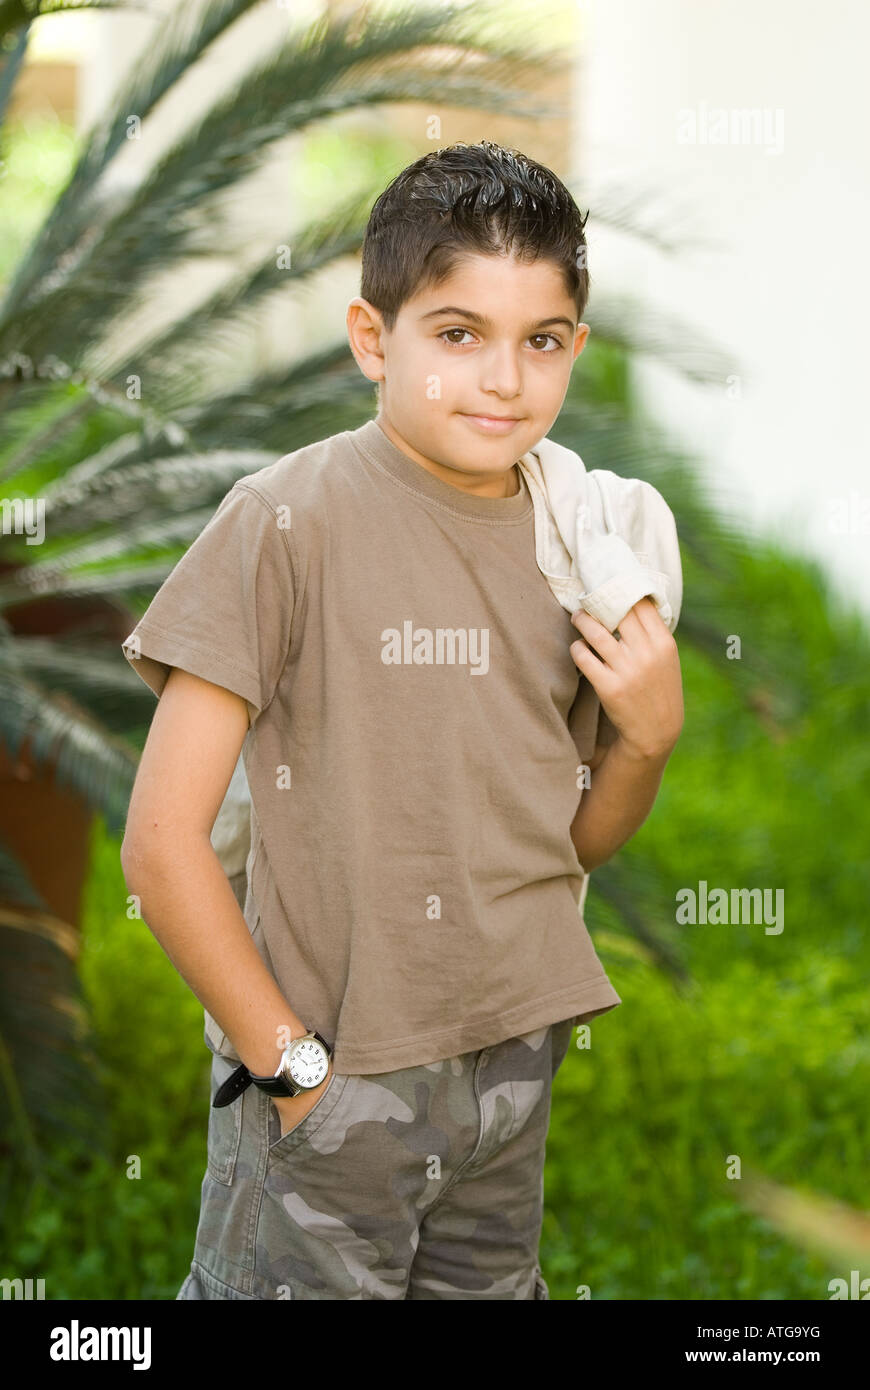 Young boy holding jacket outdoors Stock Photo